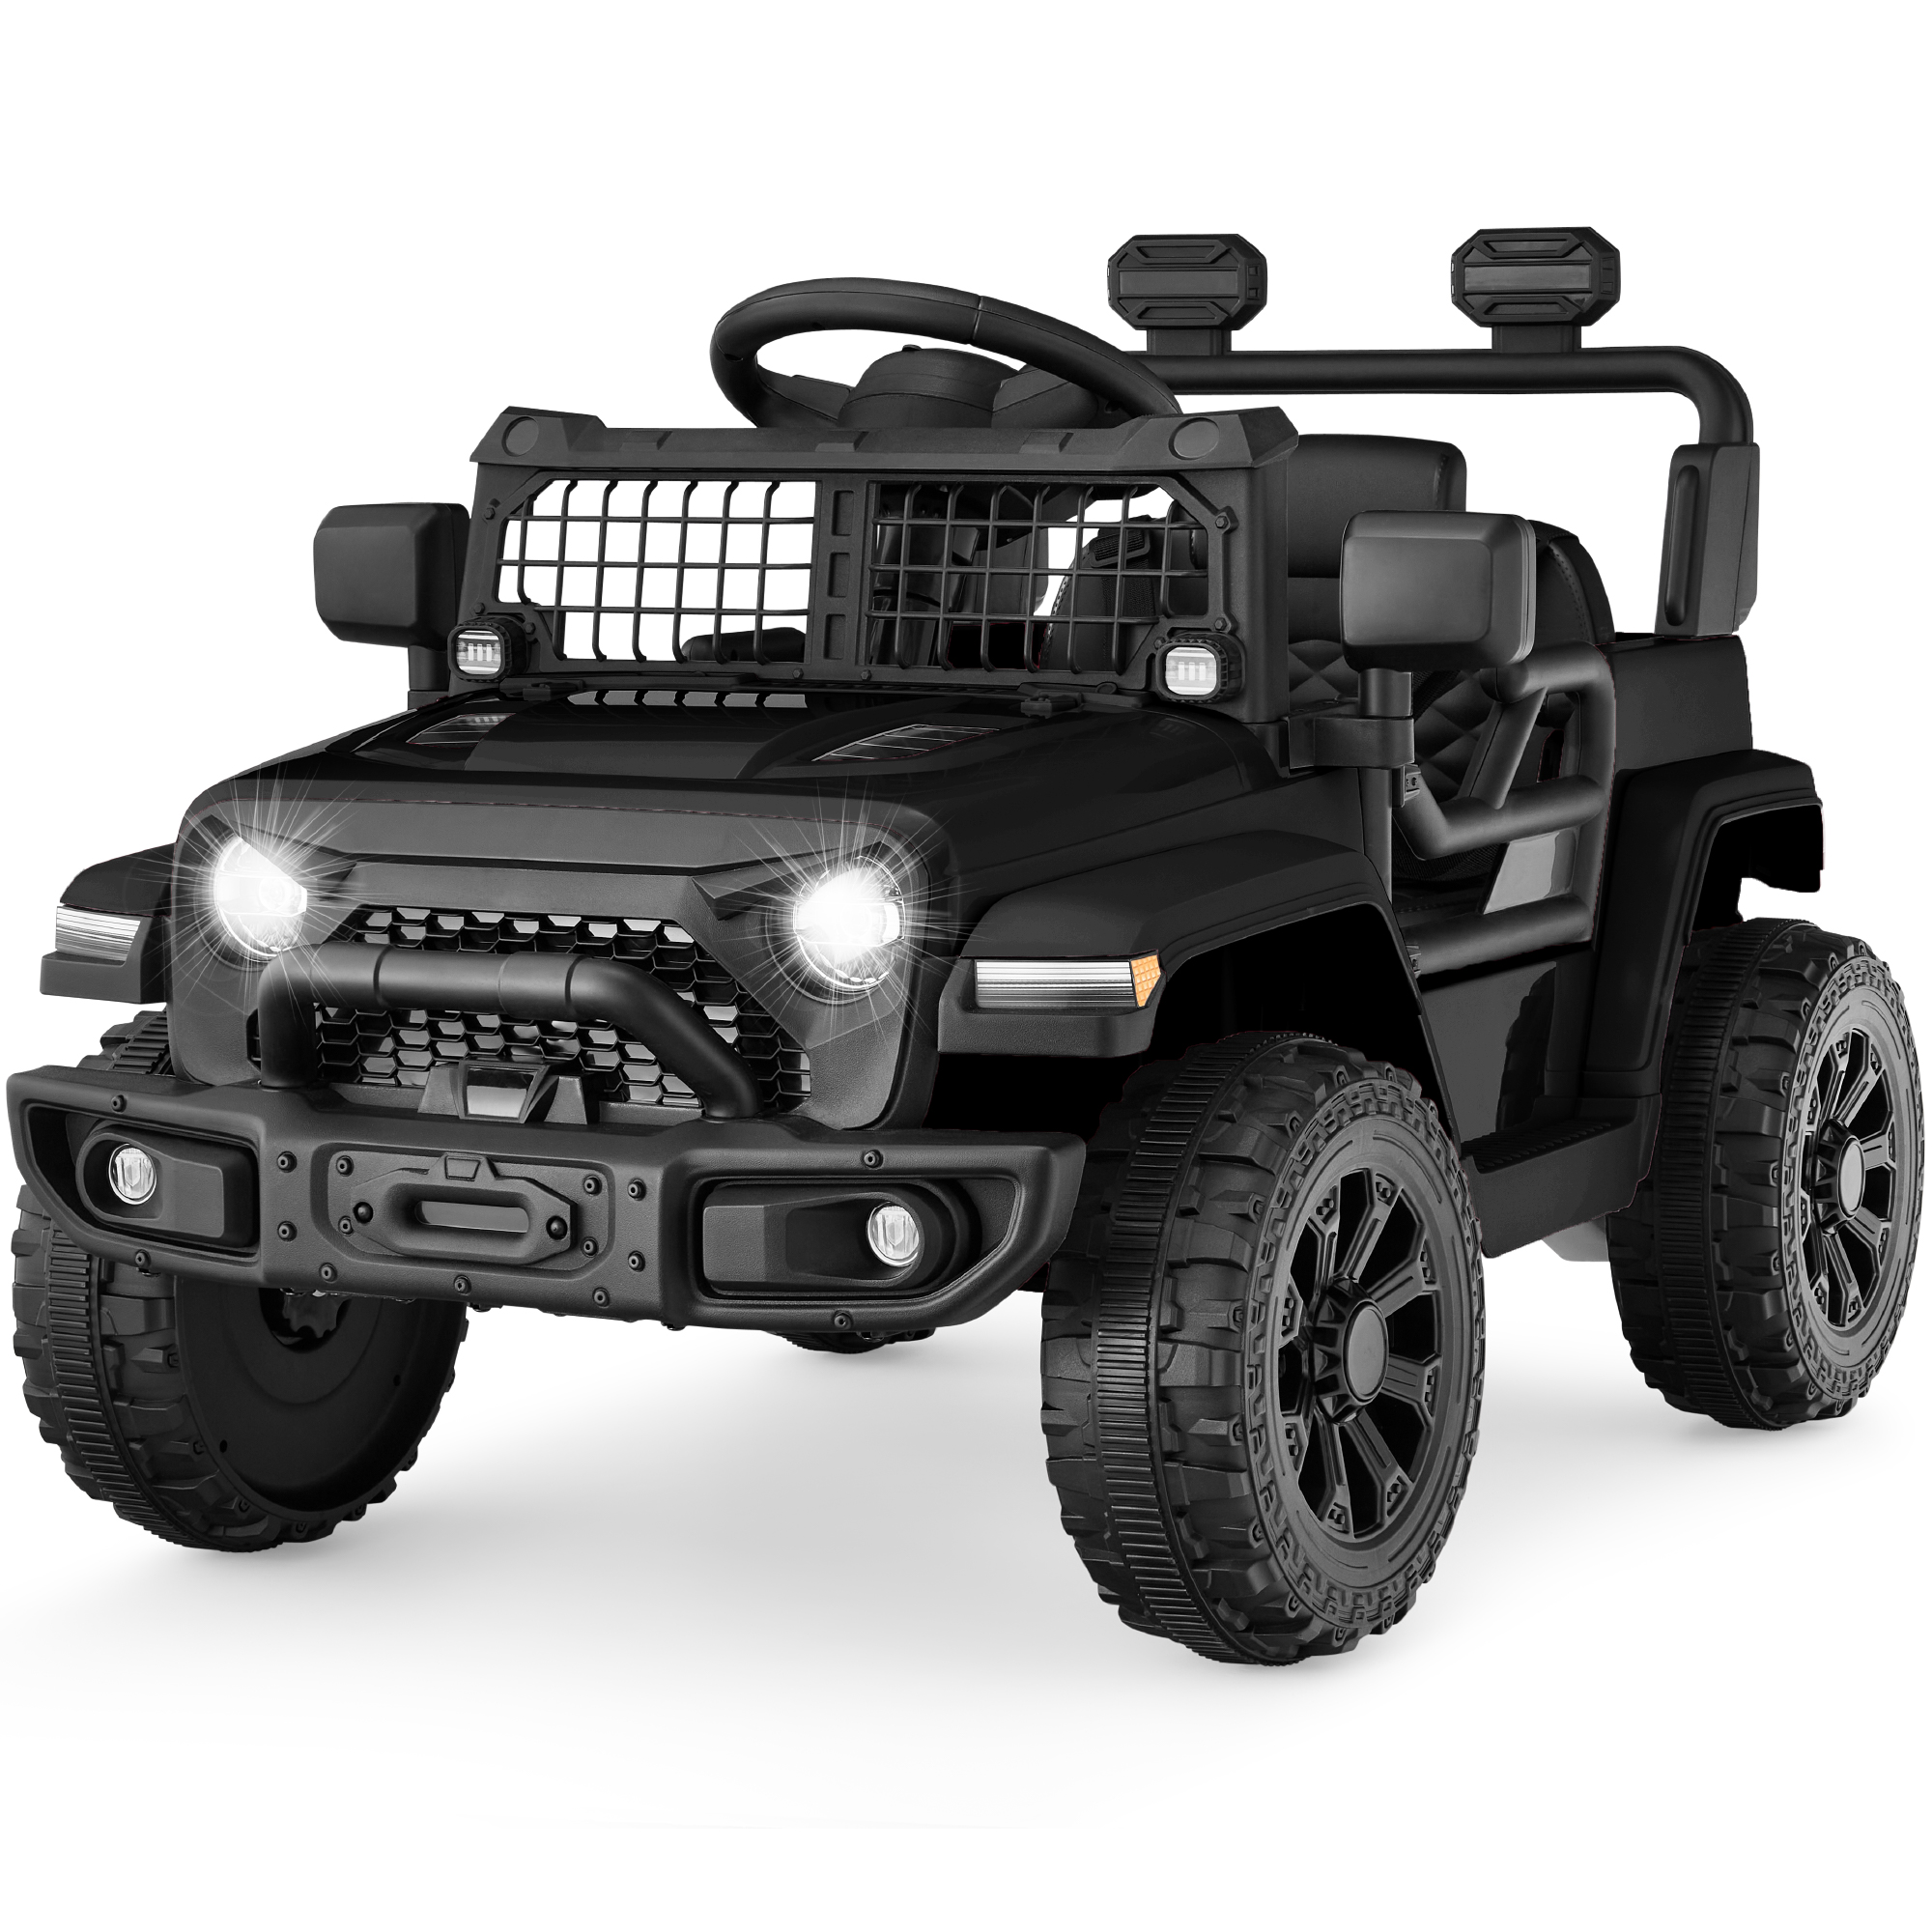 Best Choice Products 6V Kids Ride-On Truck Car w/ Parent Remote Control, 4-Wheel Suspension, LED Lights - Black - image 1 of 8